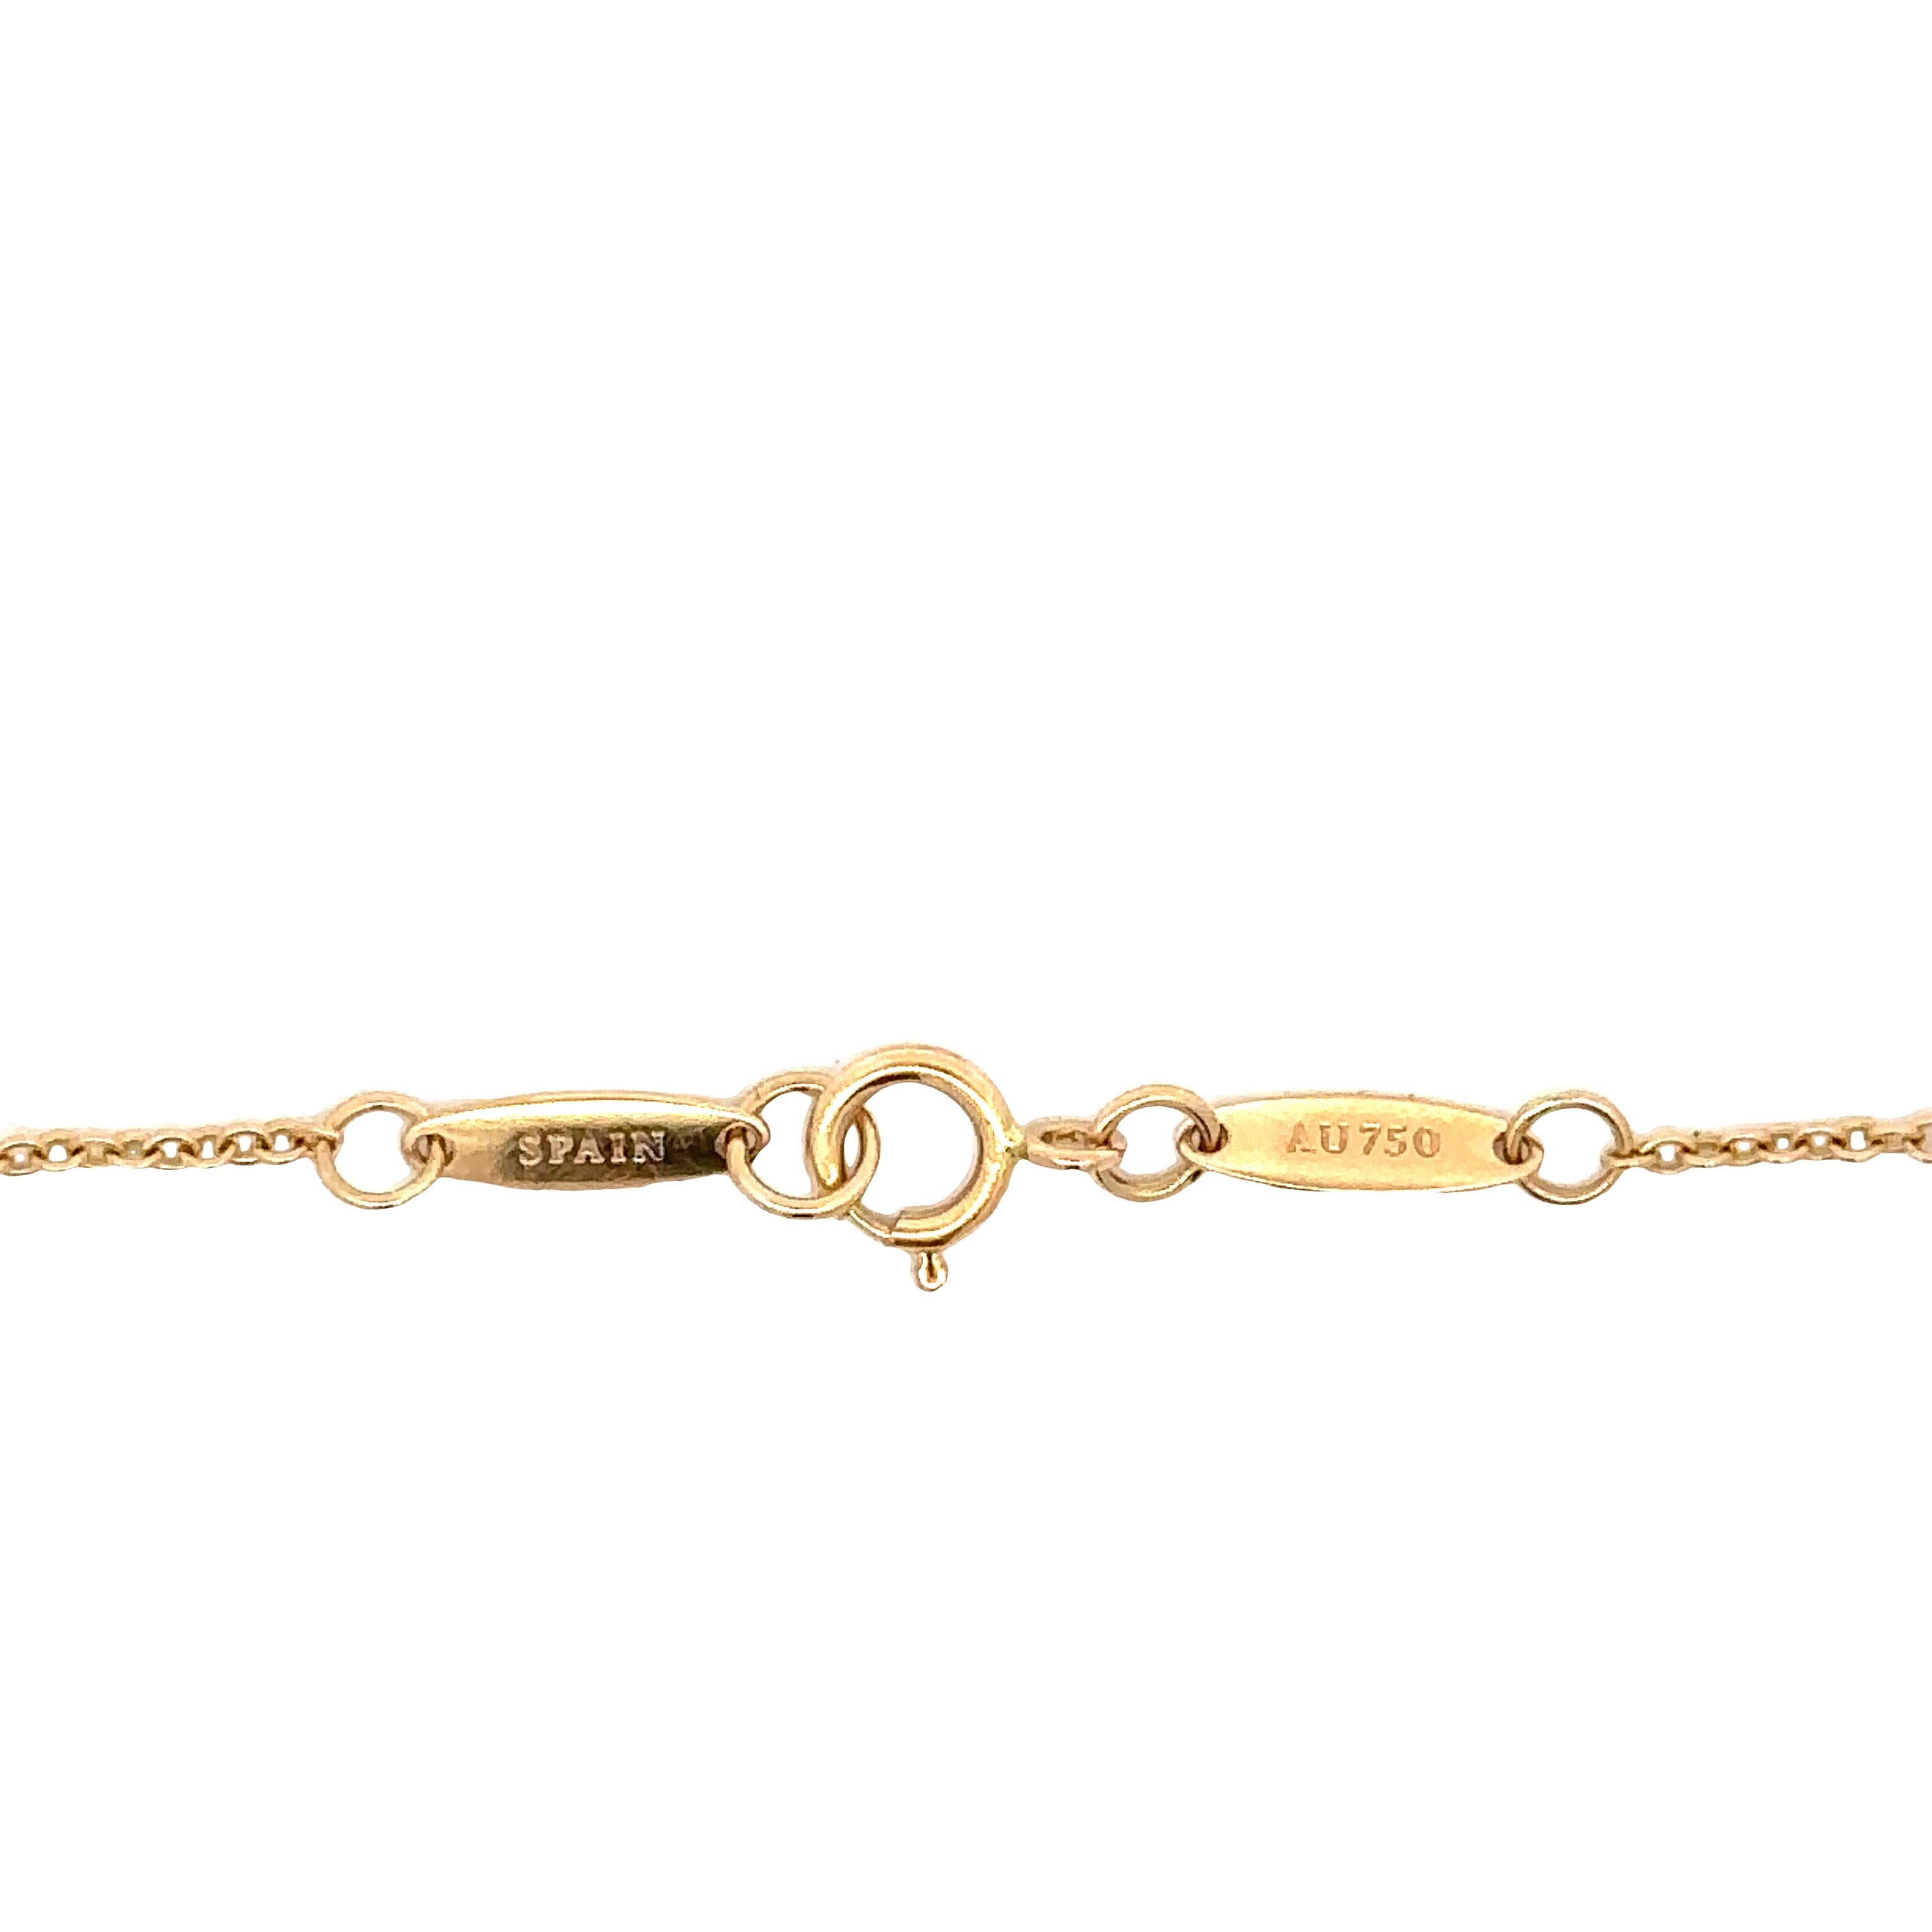 Diamonds by the Yard Diamond Bracelet in Rose Gold by Elsa Peretti T & Co In Excellent Condition For Sale In Newton, MA